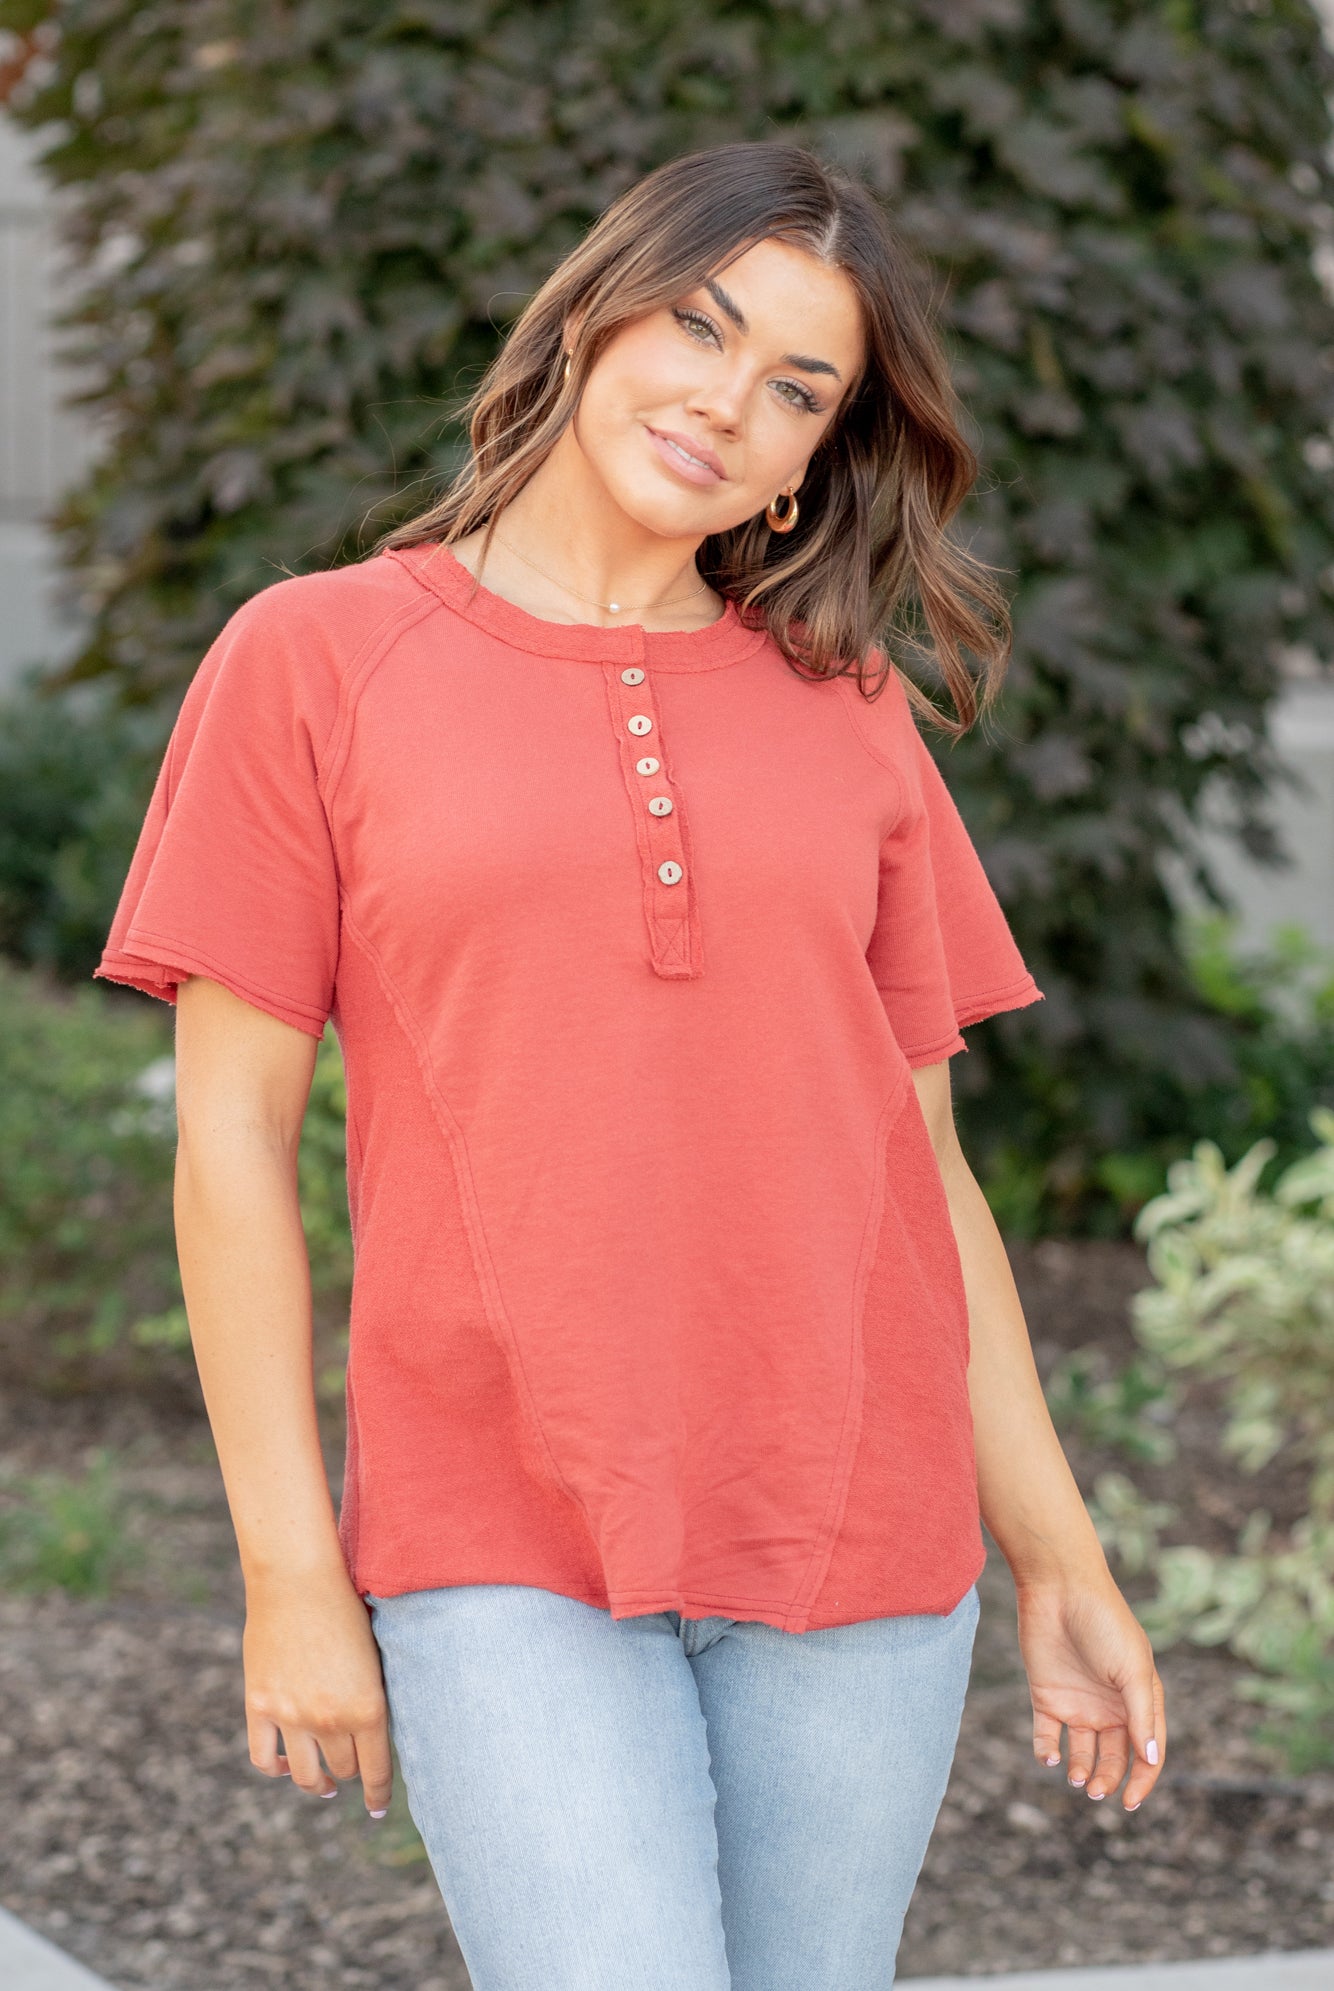 This short sleeve Henley top is great for layering up or down during winter and pairs well with any denim.  Color: Red Brick Button Up Front Henley Raglan Top Neckline: Round Sleeve: Short Sleeve 80% COTTON 20% POLYESTER Style #: FBT7658-A19-BrickRed Contact us for any additional measurements or sizing.